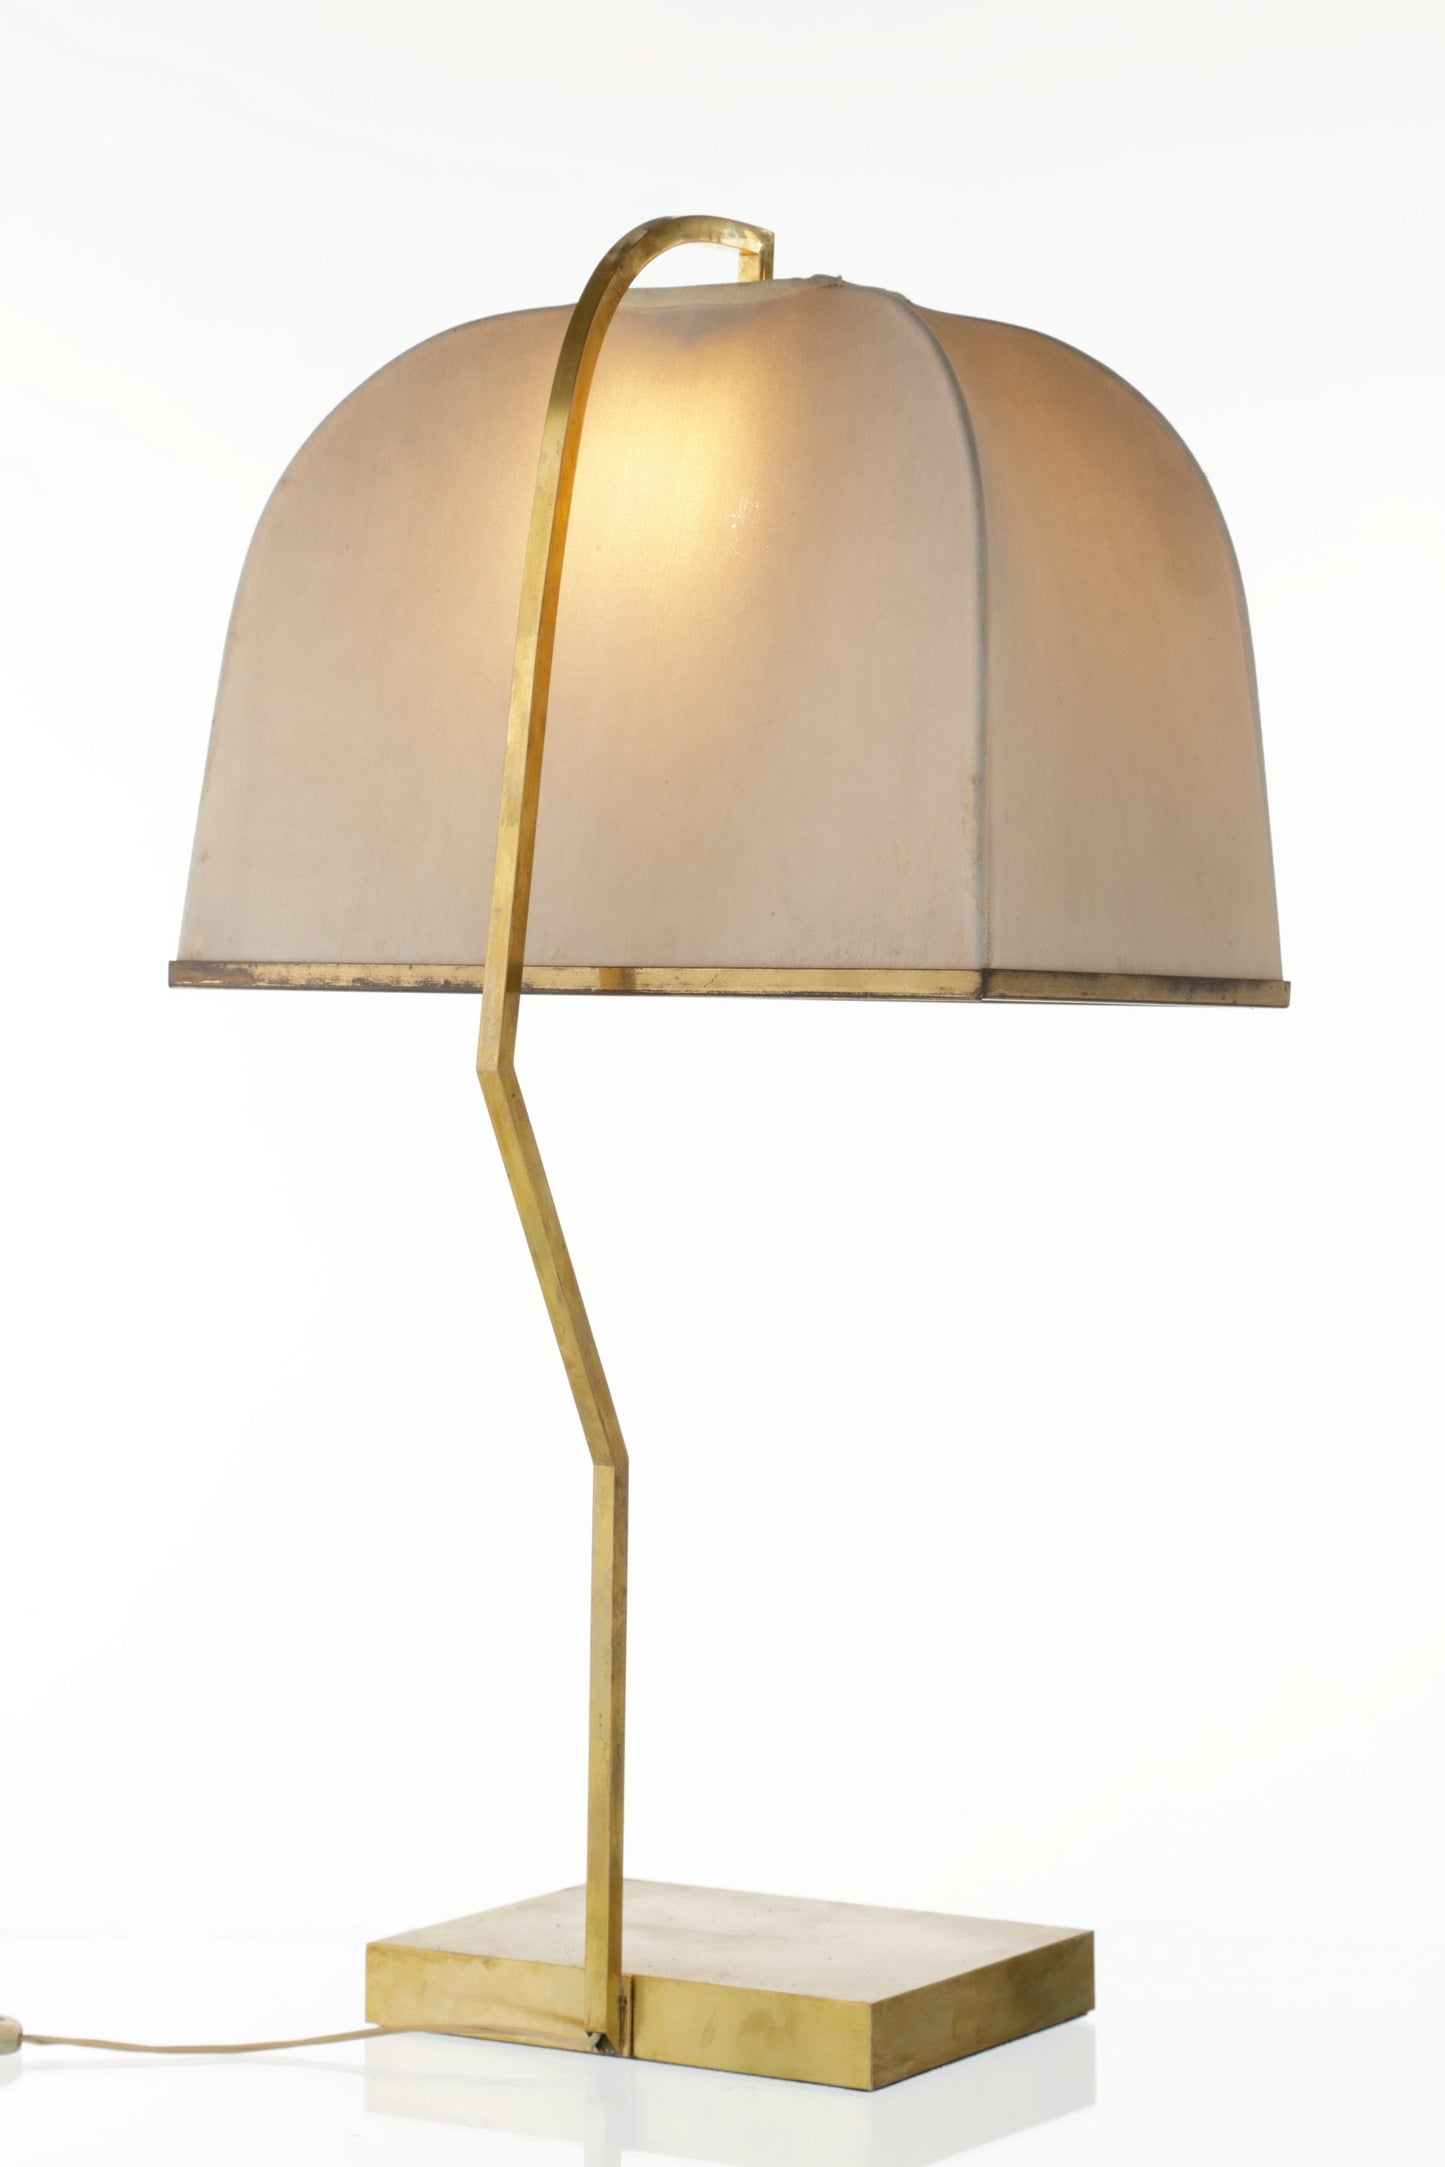 70s brass table lamp